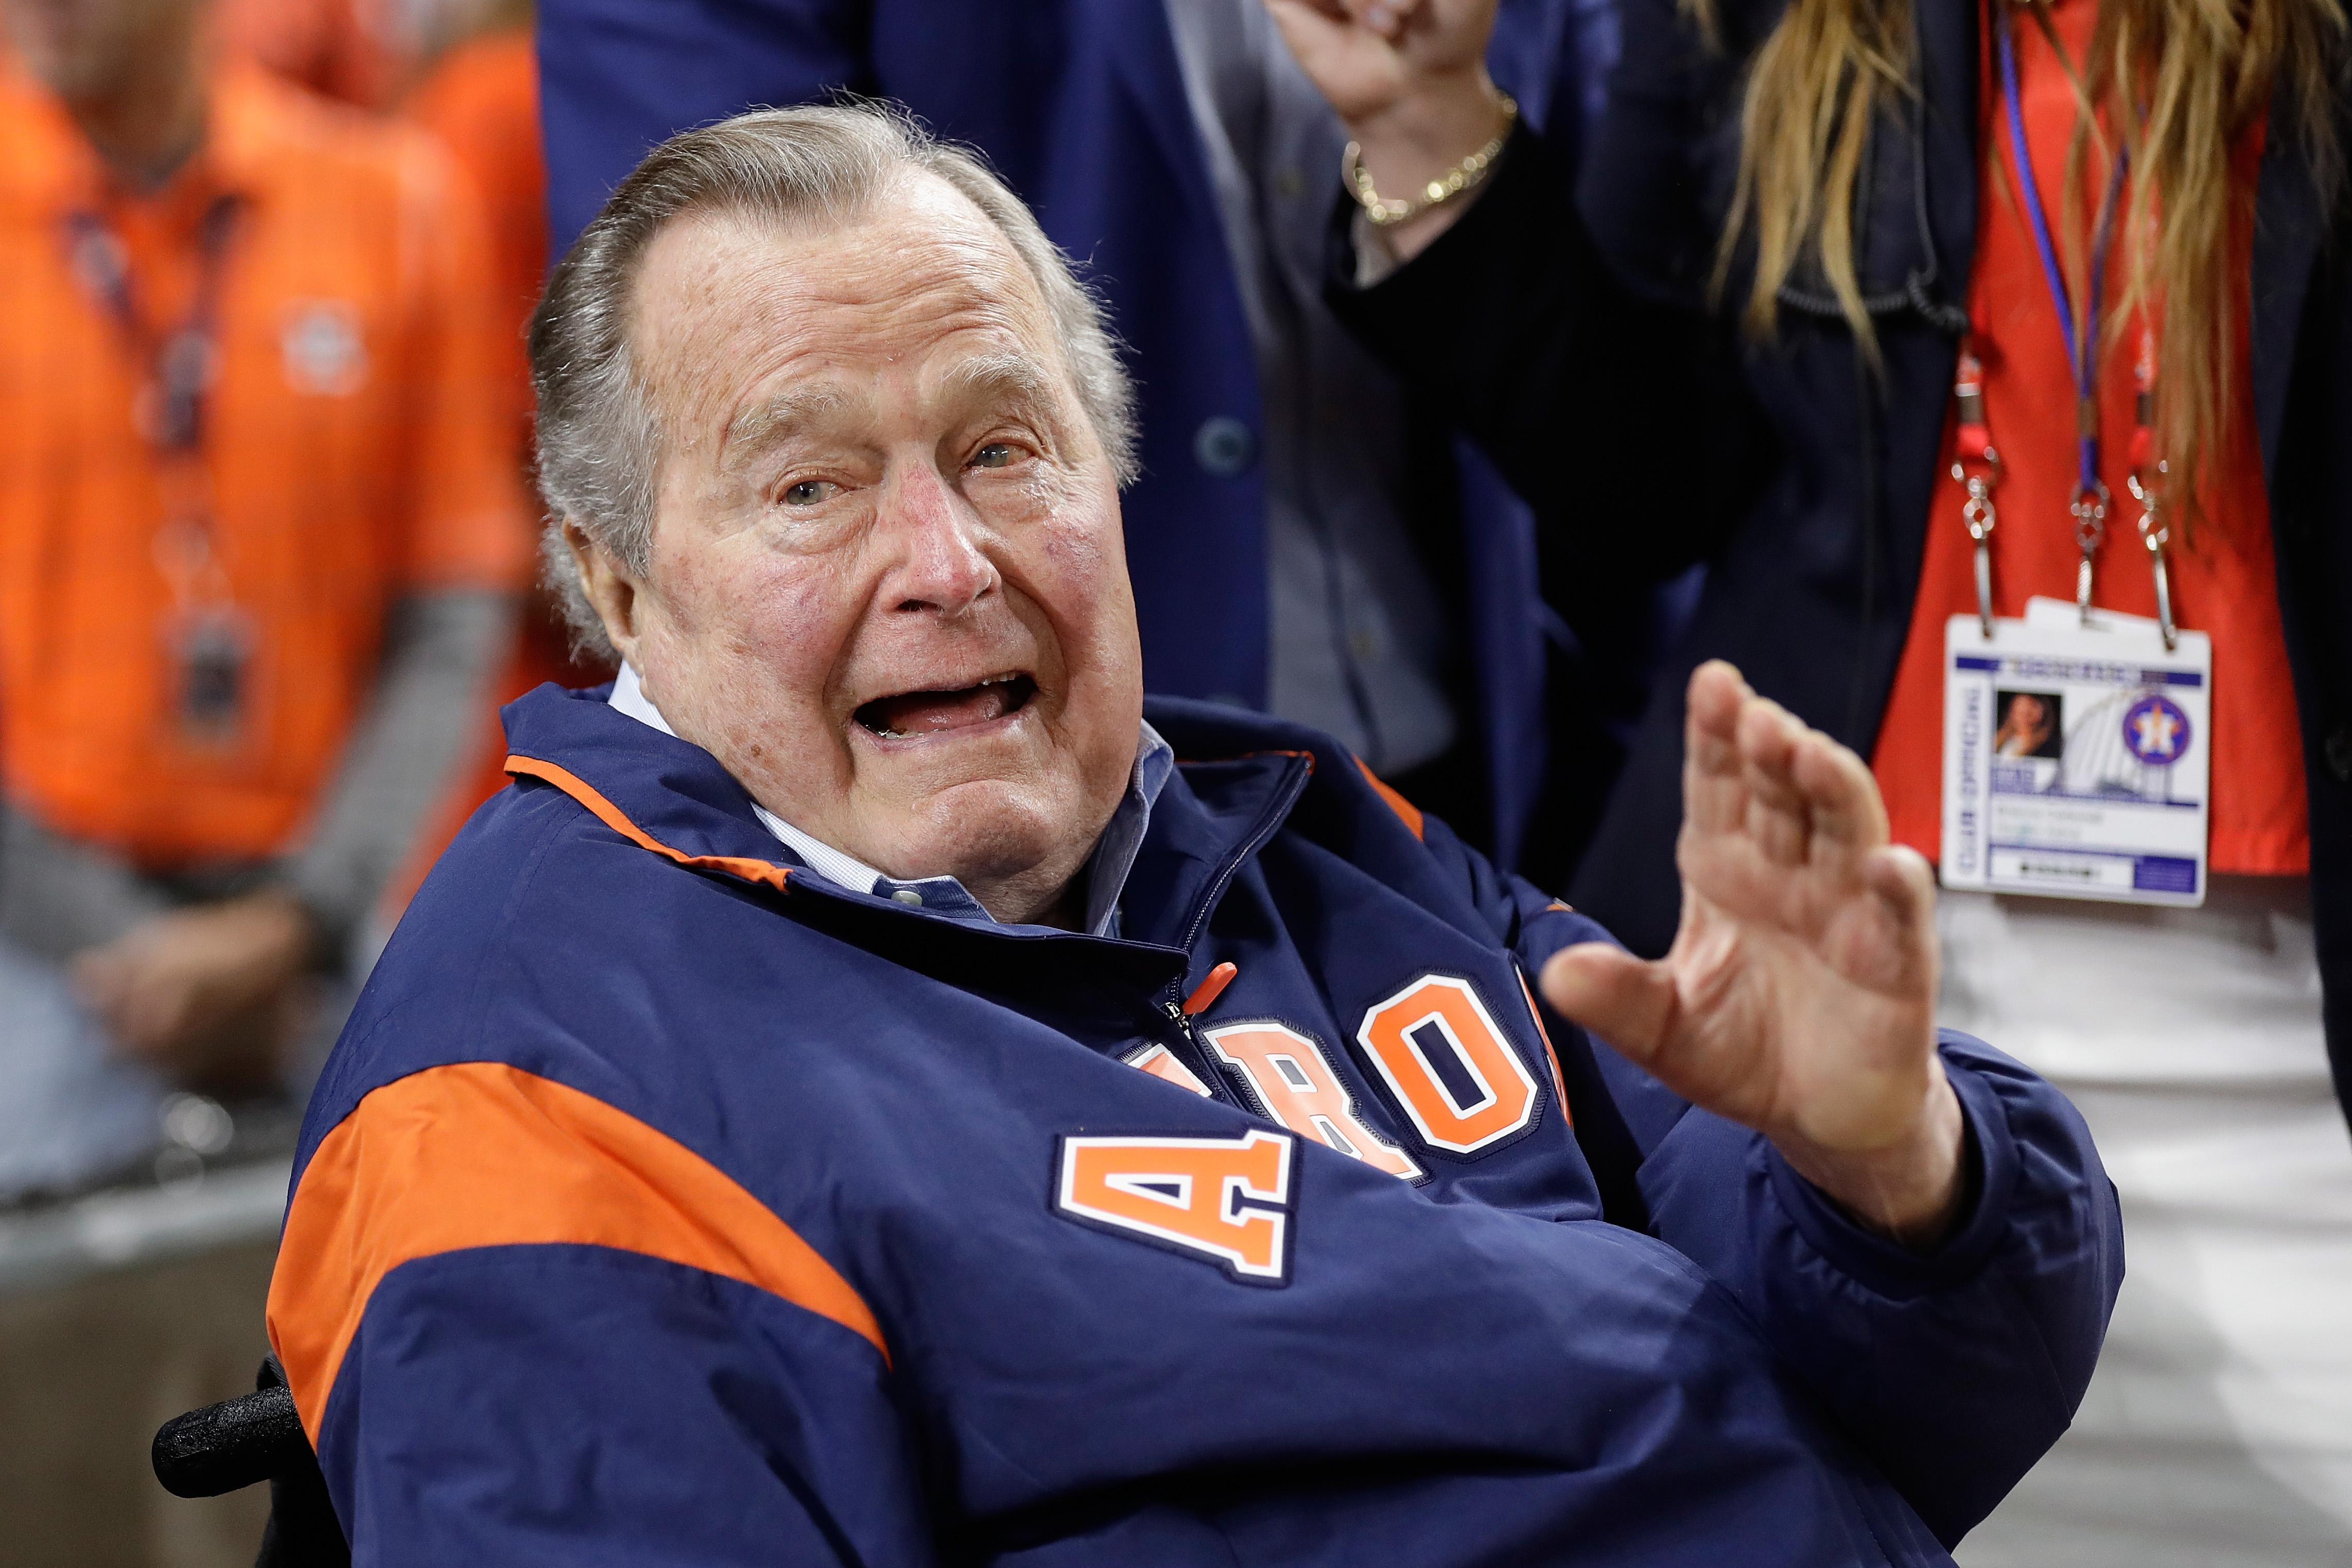 George H. W. Bush waves to the camera. He is wearing an Astros jacket, and figures in sports-related attire can be seen behind him.